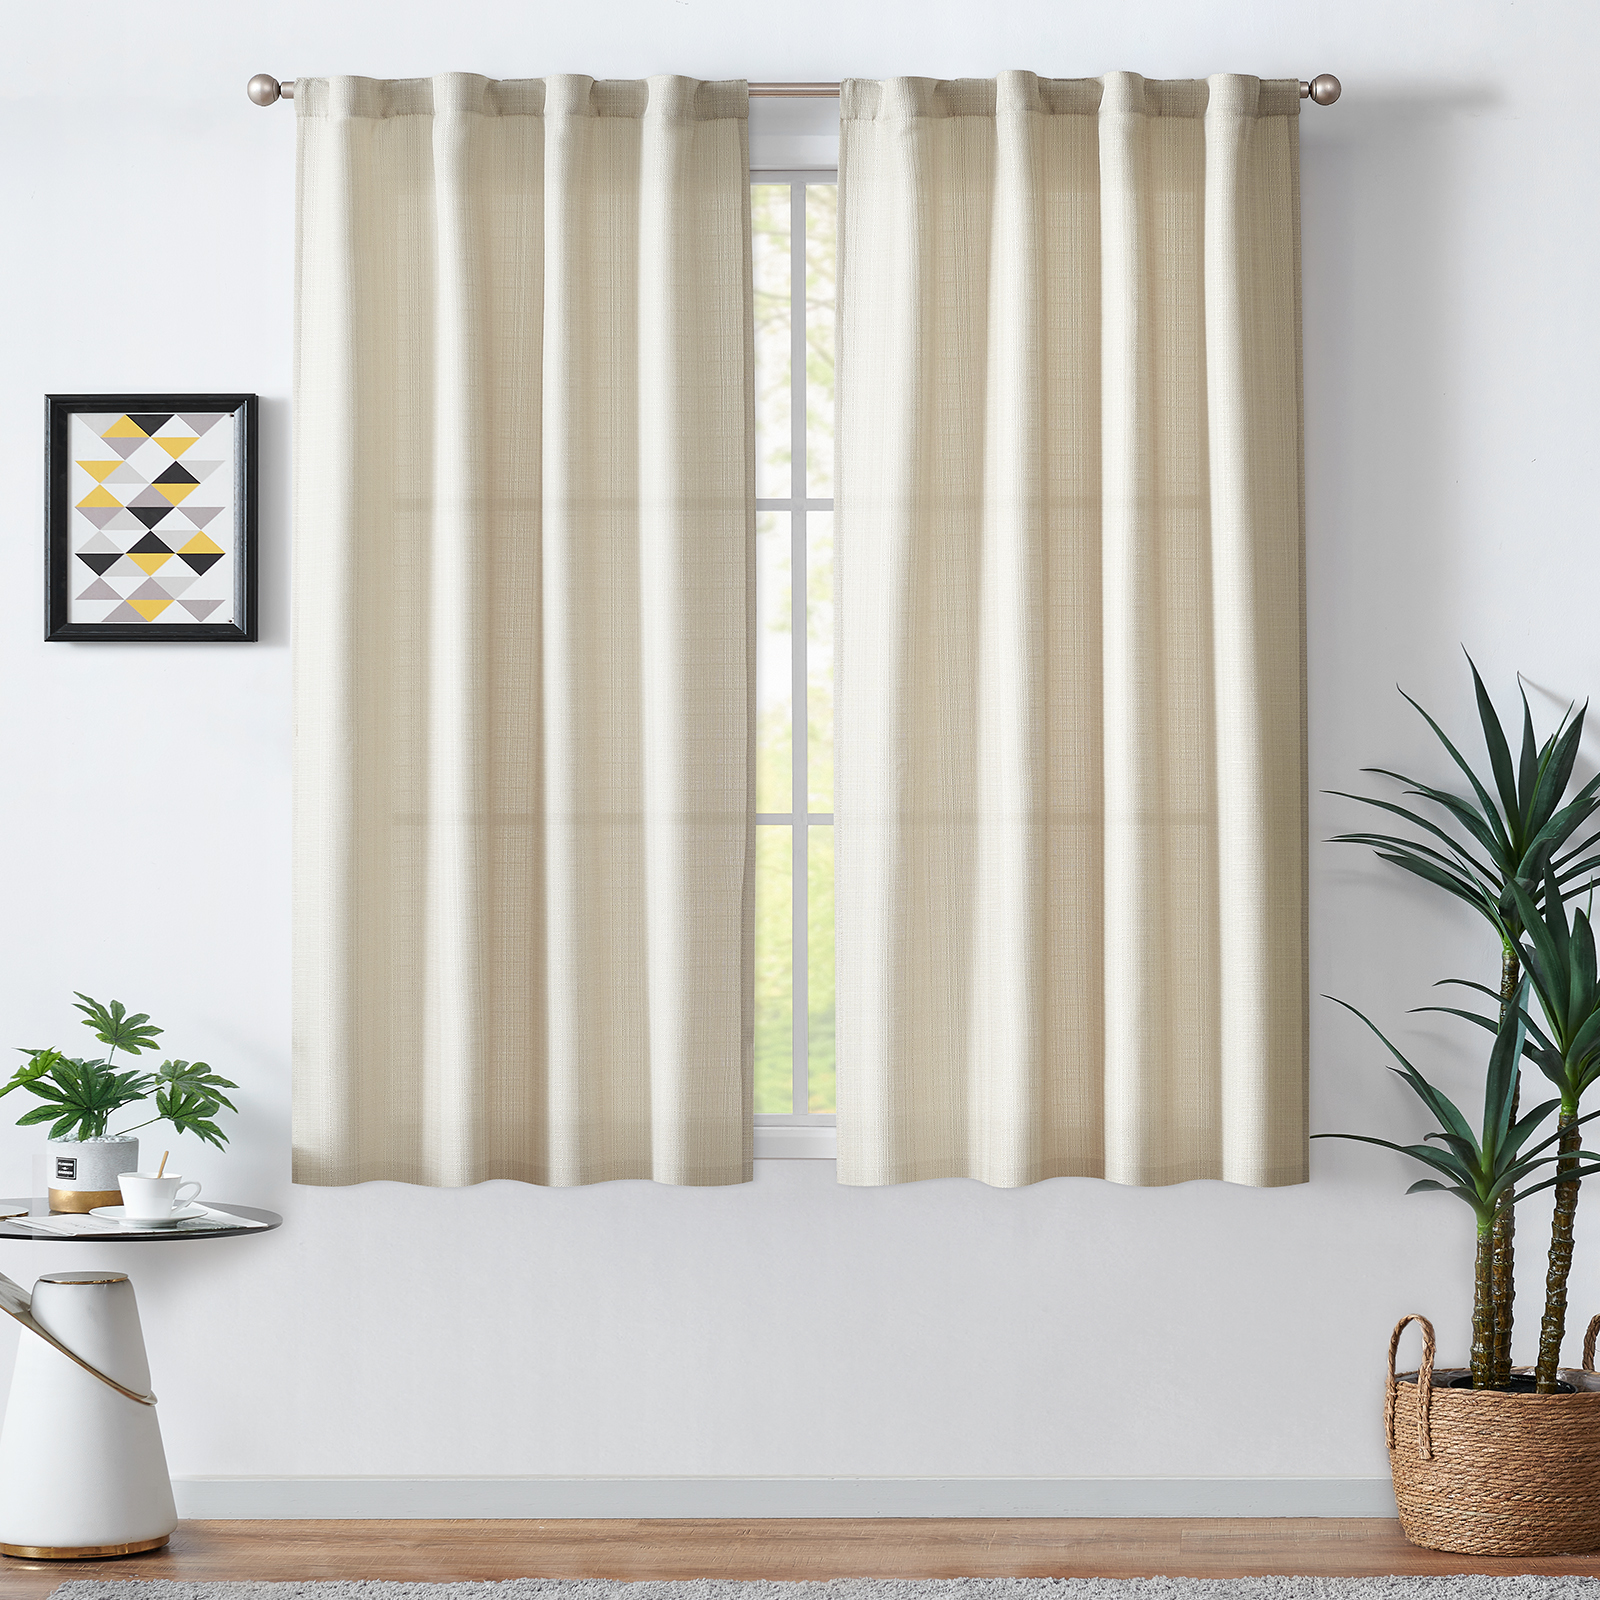 Curtainking Heathered Beige Curtains for Living Room 63 Inches Linen Textured Curtains Light Filtering Back Tab Curtains Casual Weave Back Tab Drapes 2 Panels - image 2 of 8